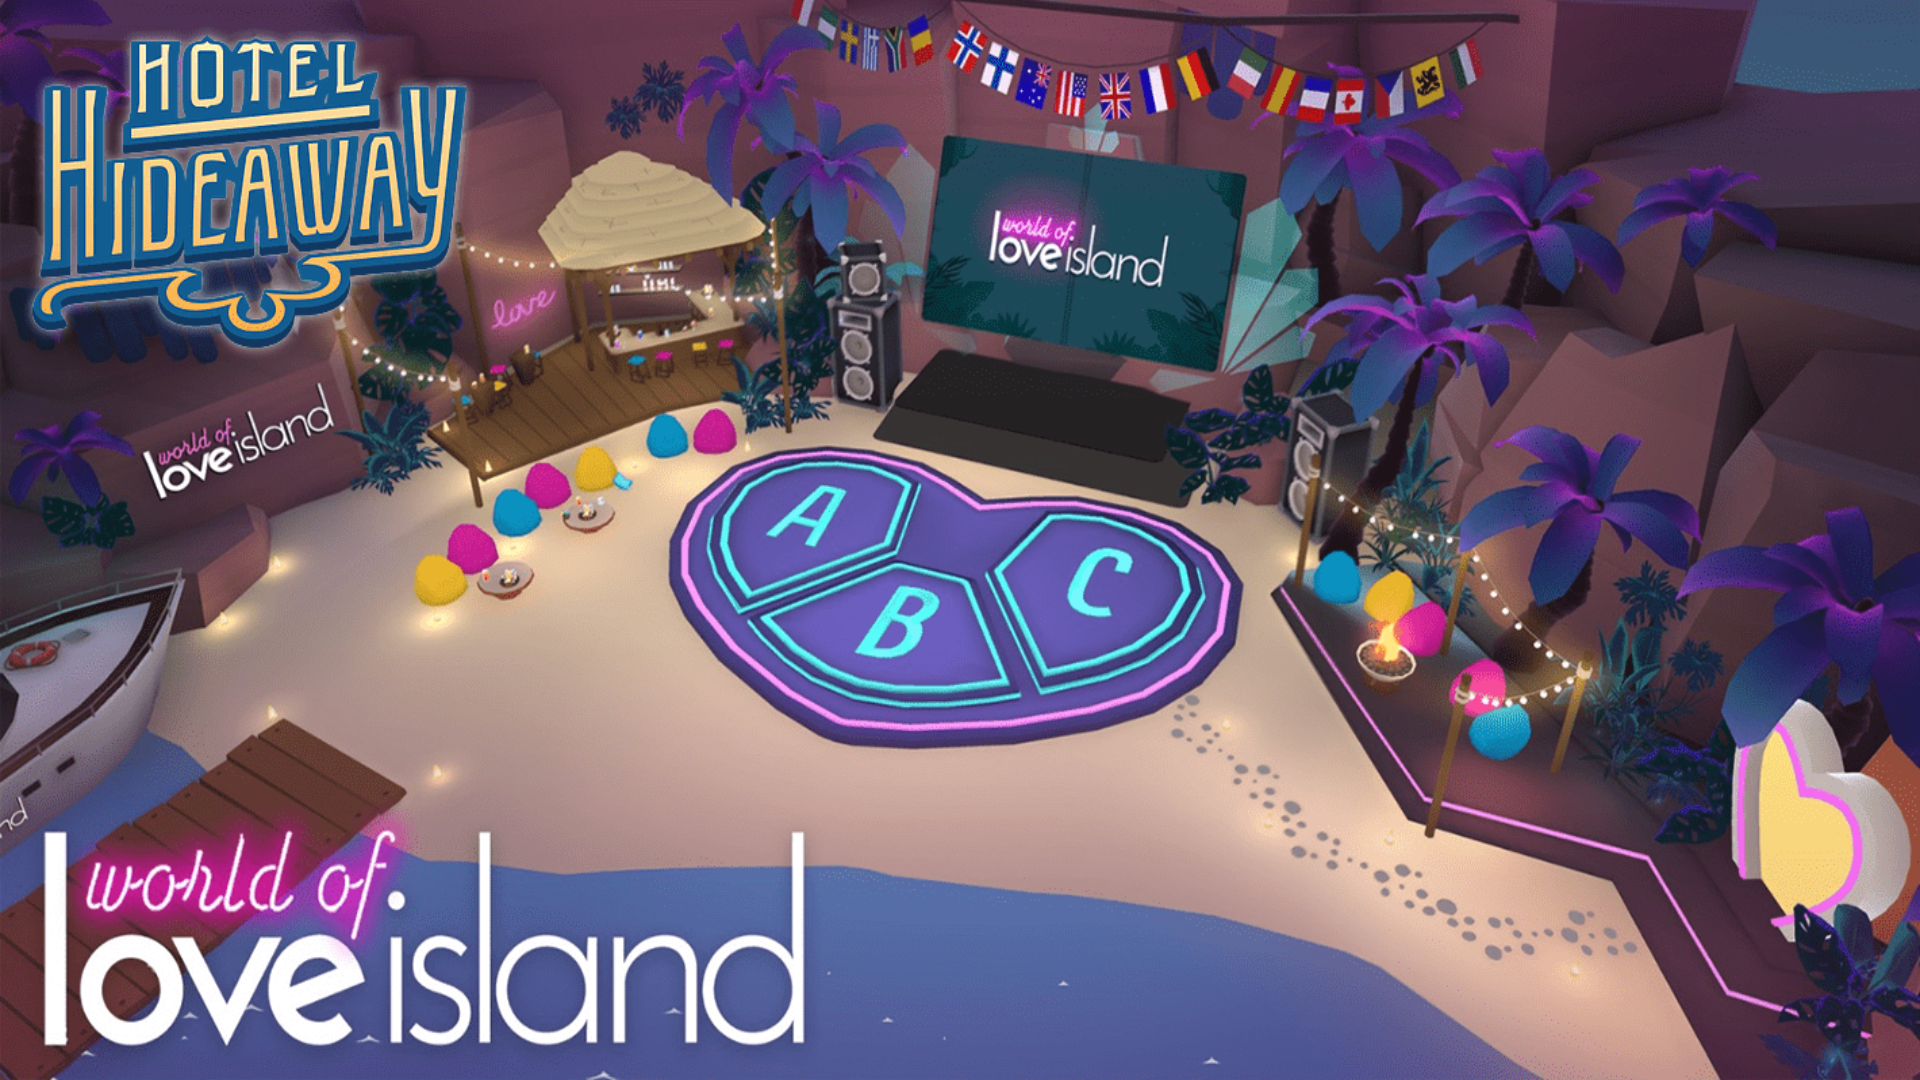 Azerion, ITV Studios' 'Love Island' to Expand Hotel Hideaway Experience